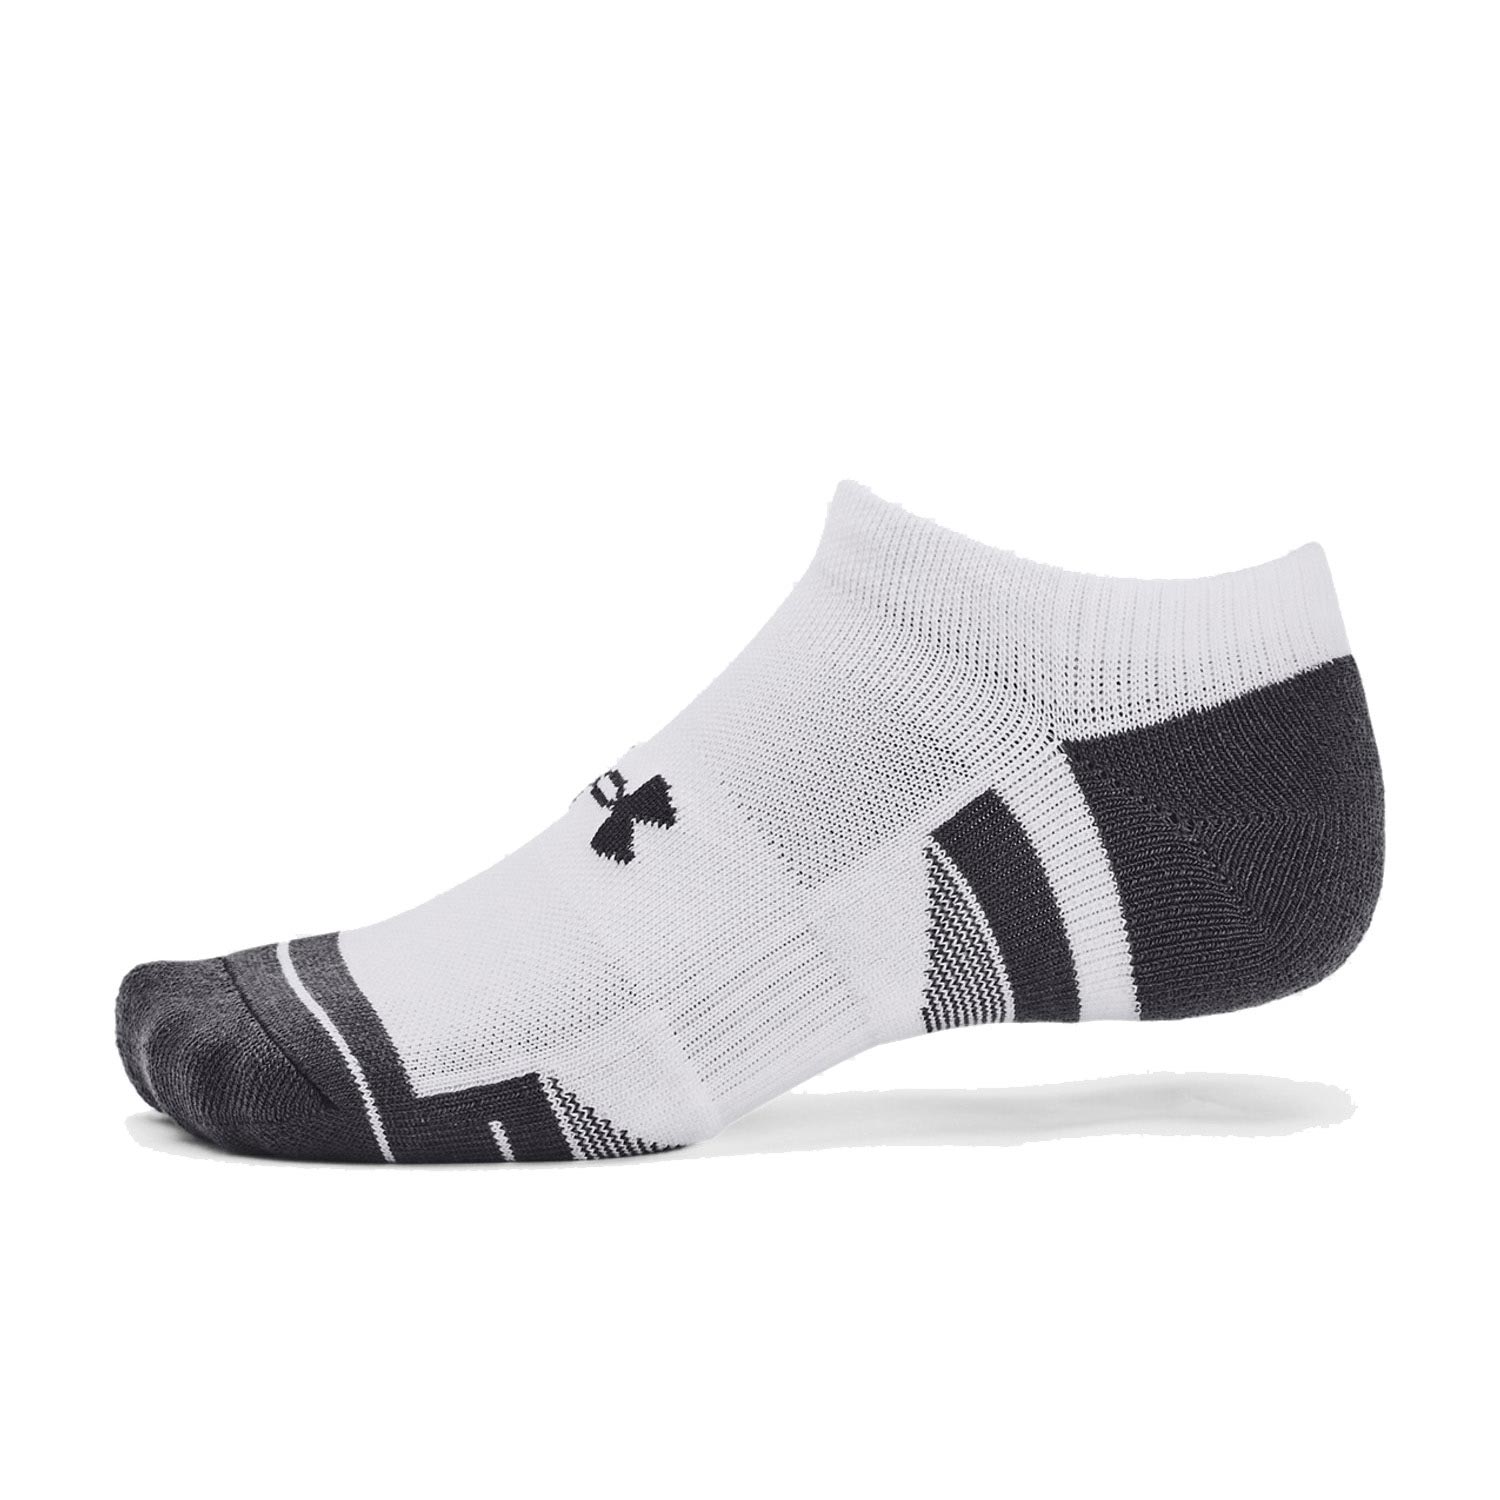 UNDER ARMOUR PERFORMANCE TECH 3 PACK NO SHOW SOCKS